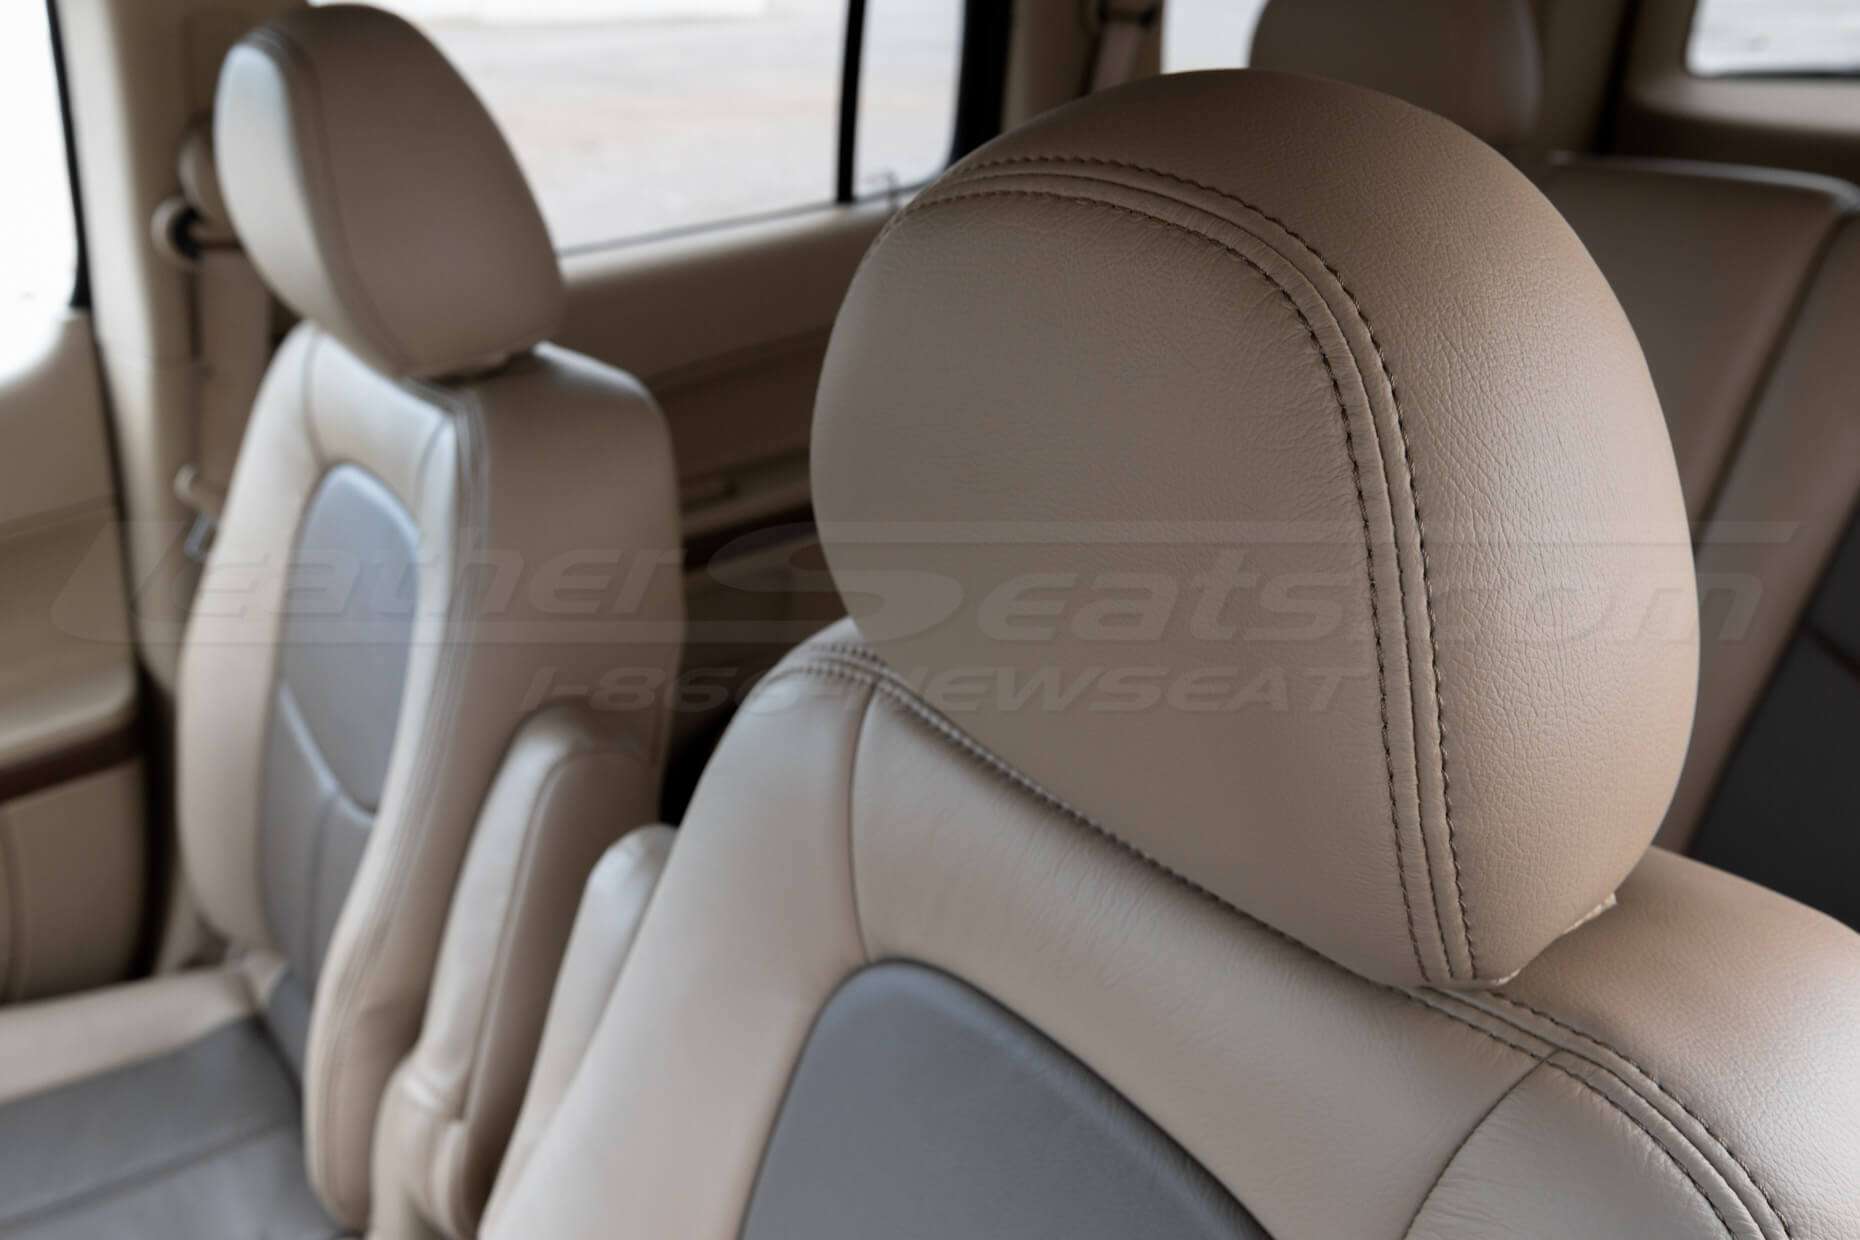 Installed leather headrest cover in Sandstone